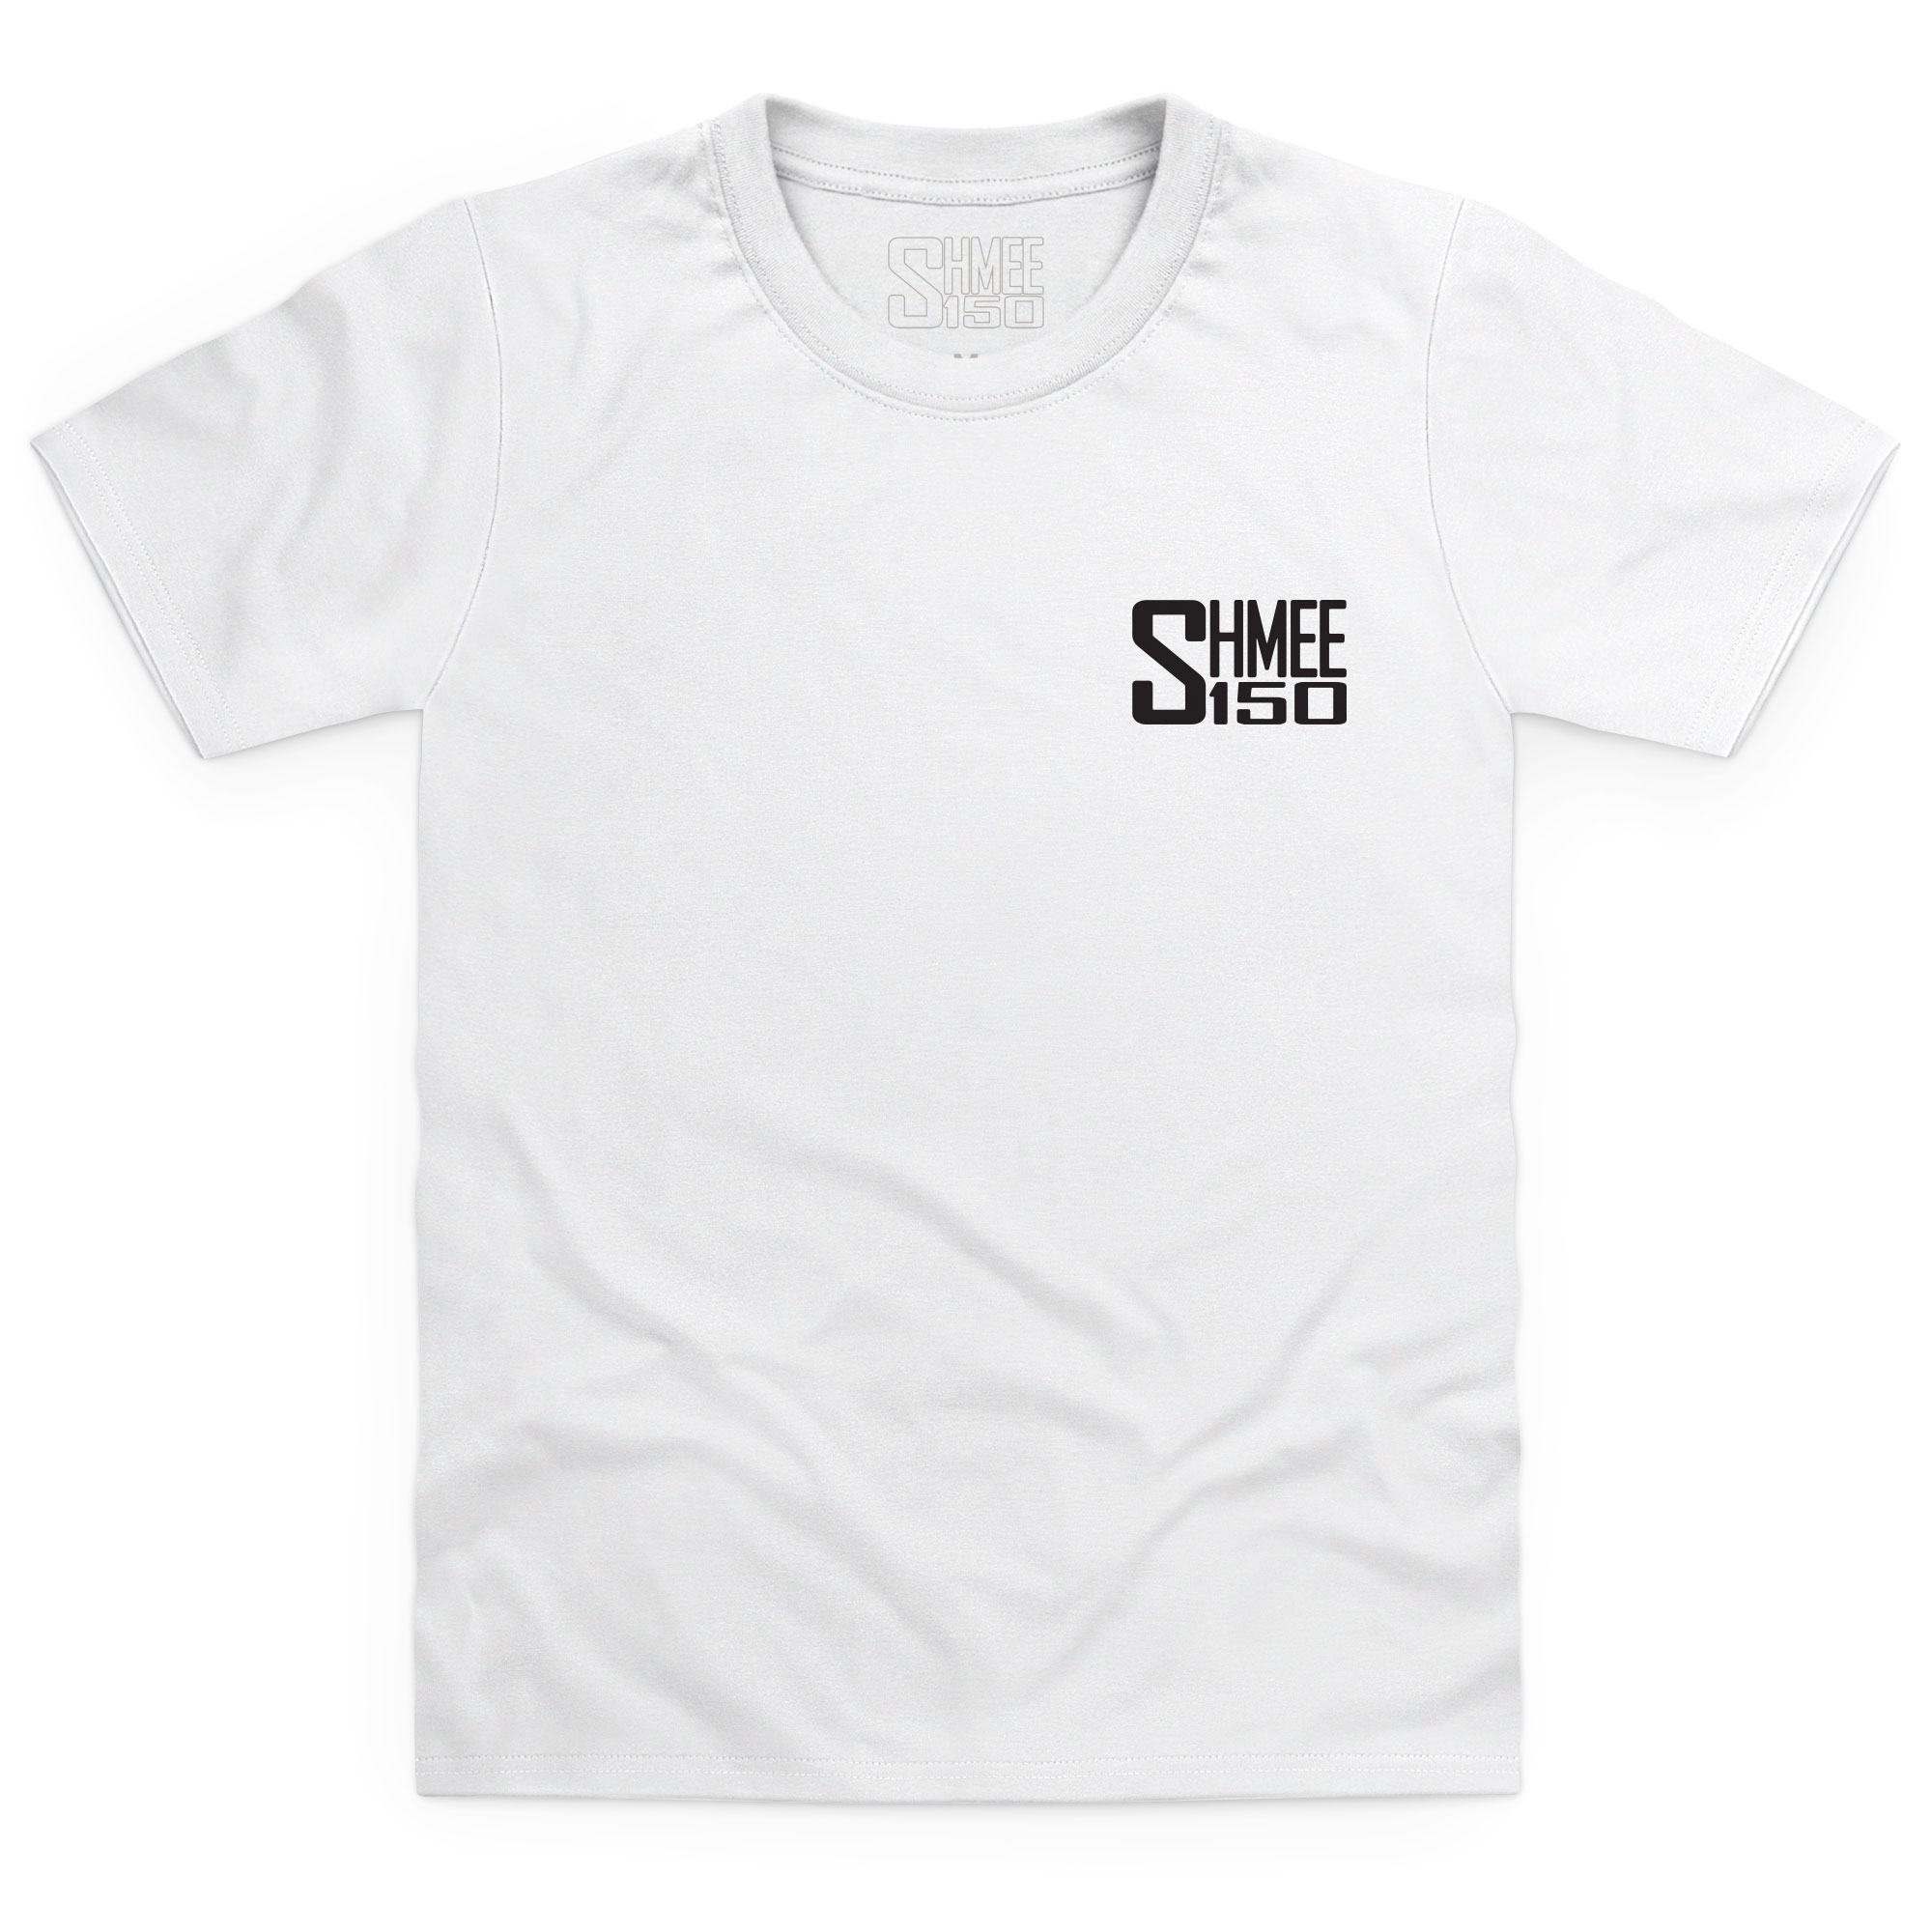 Shmee150 - T-shirt - Black Outline - Adults - Shmee150 - Living the ...